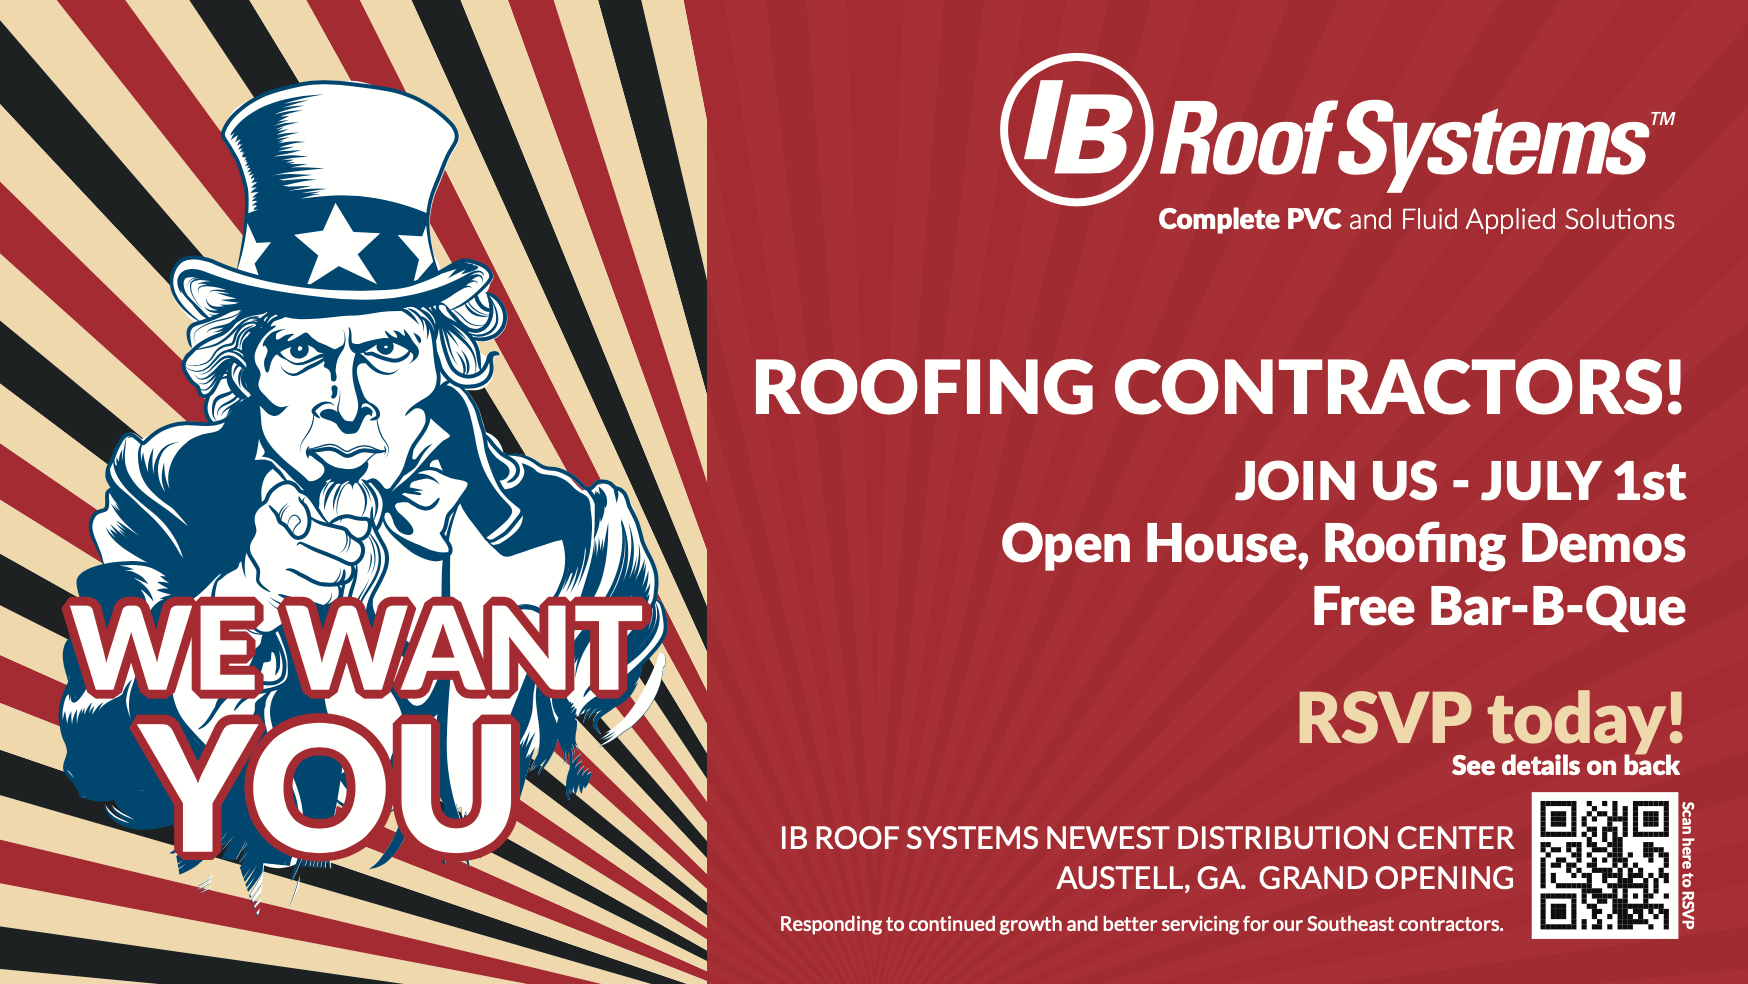 Grand Opening - IB Roof Systems, Austell, GA